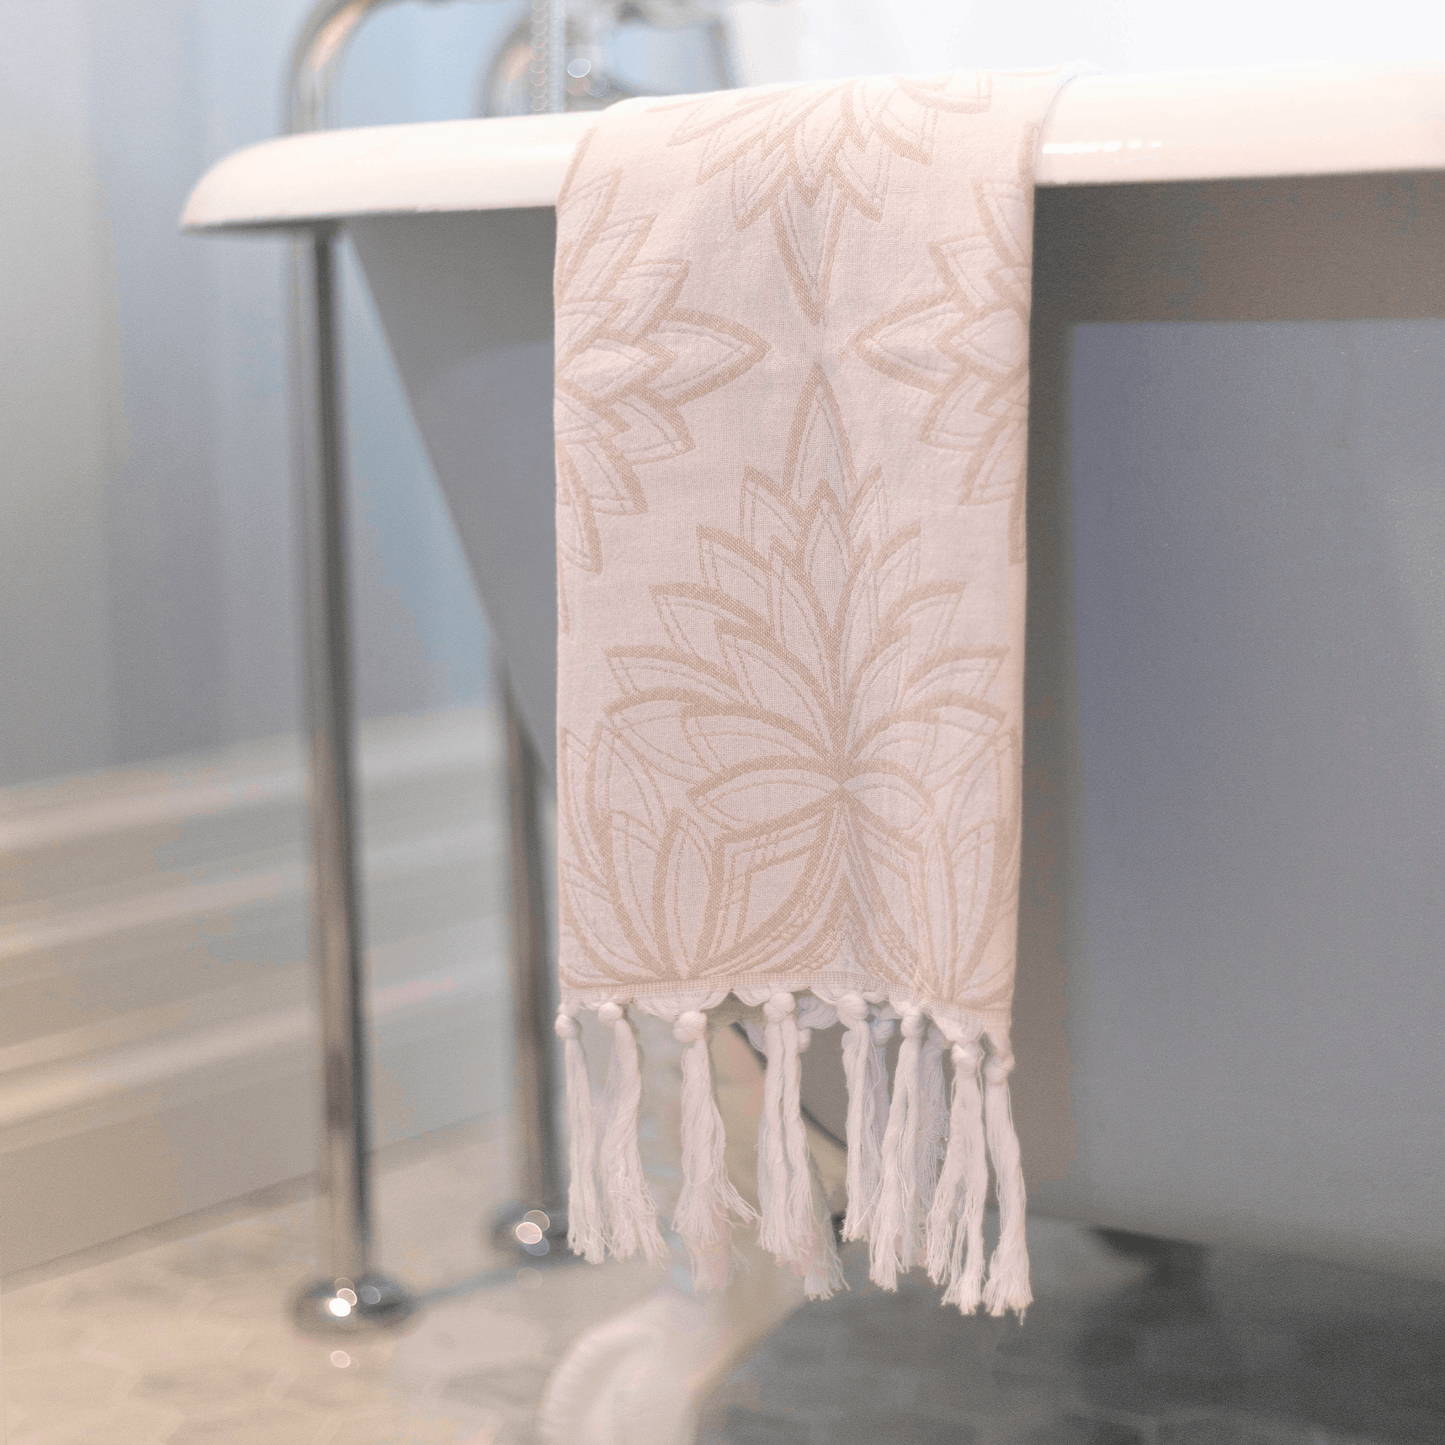 oat and white Turkish hand towel in the bath